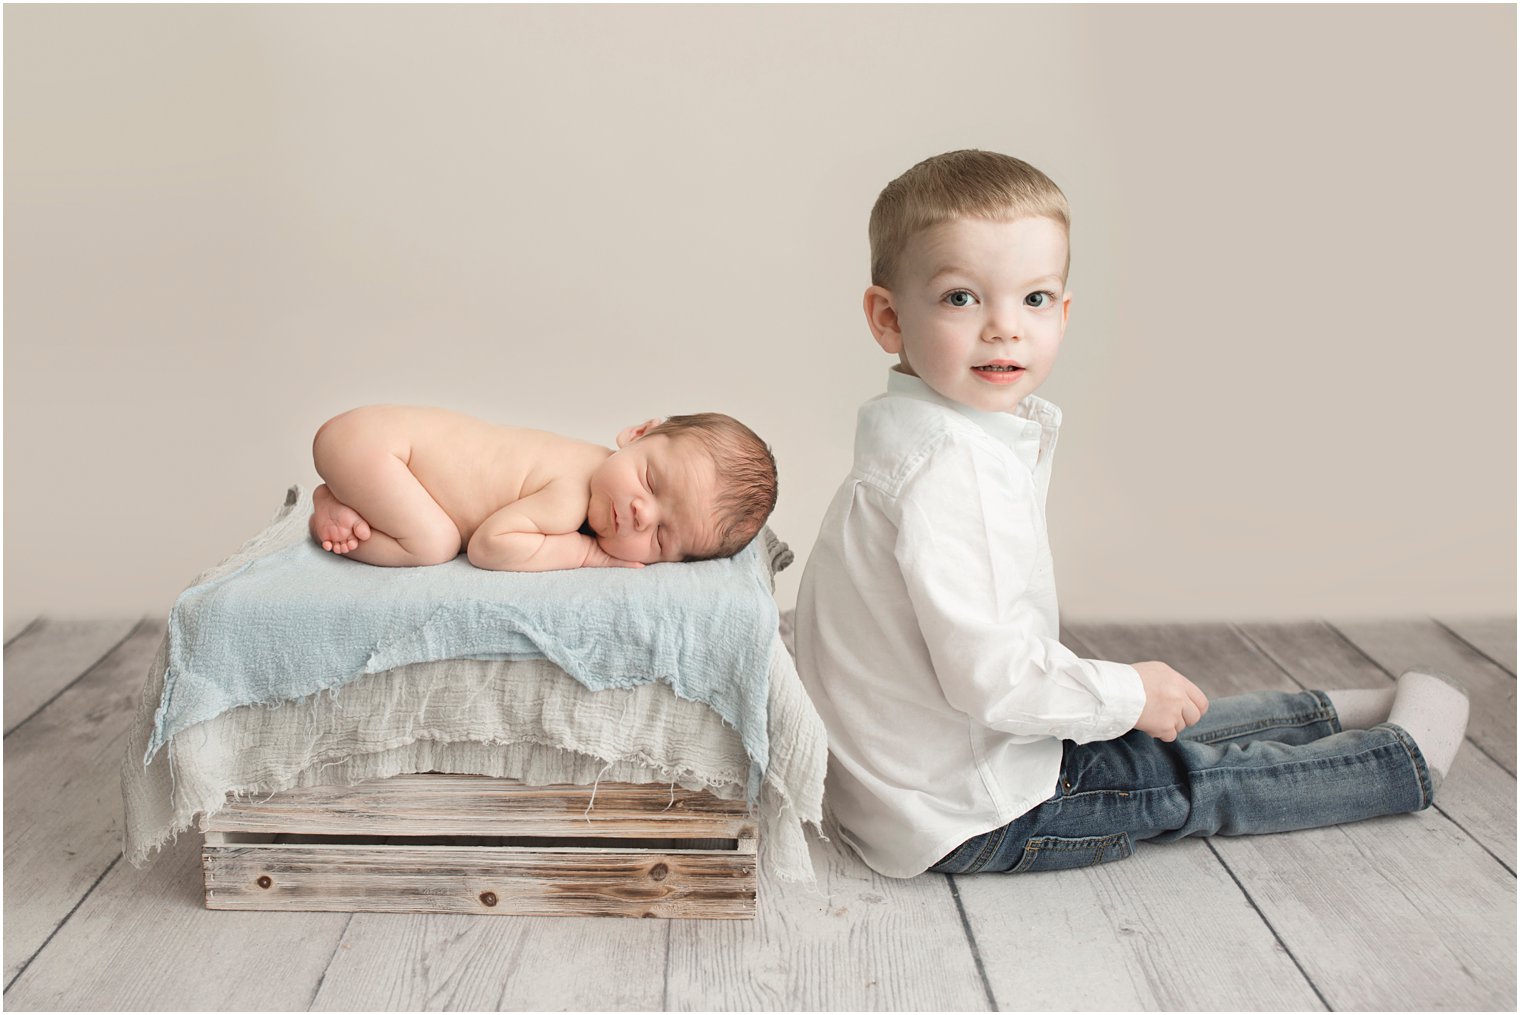 Toddler and newborn sibling during newborn session | Photos by Idalia Photography